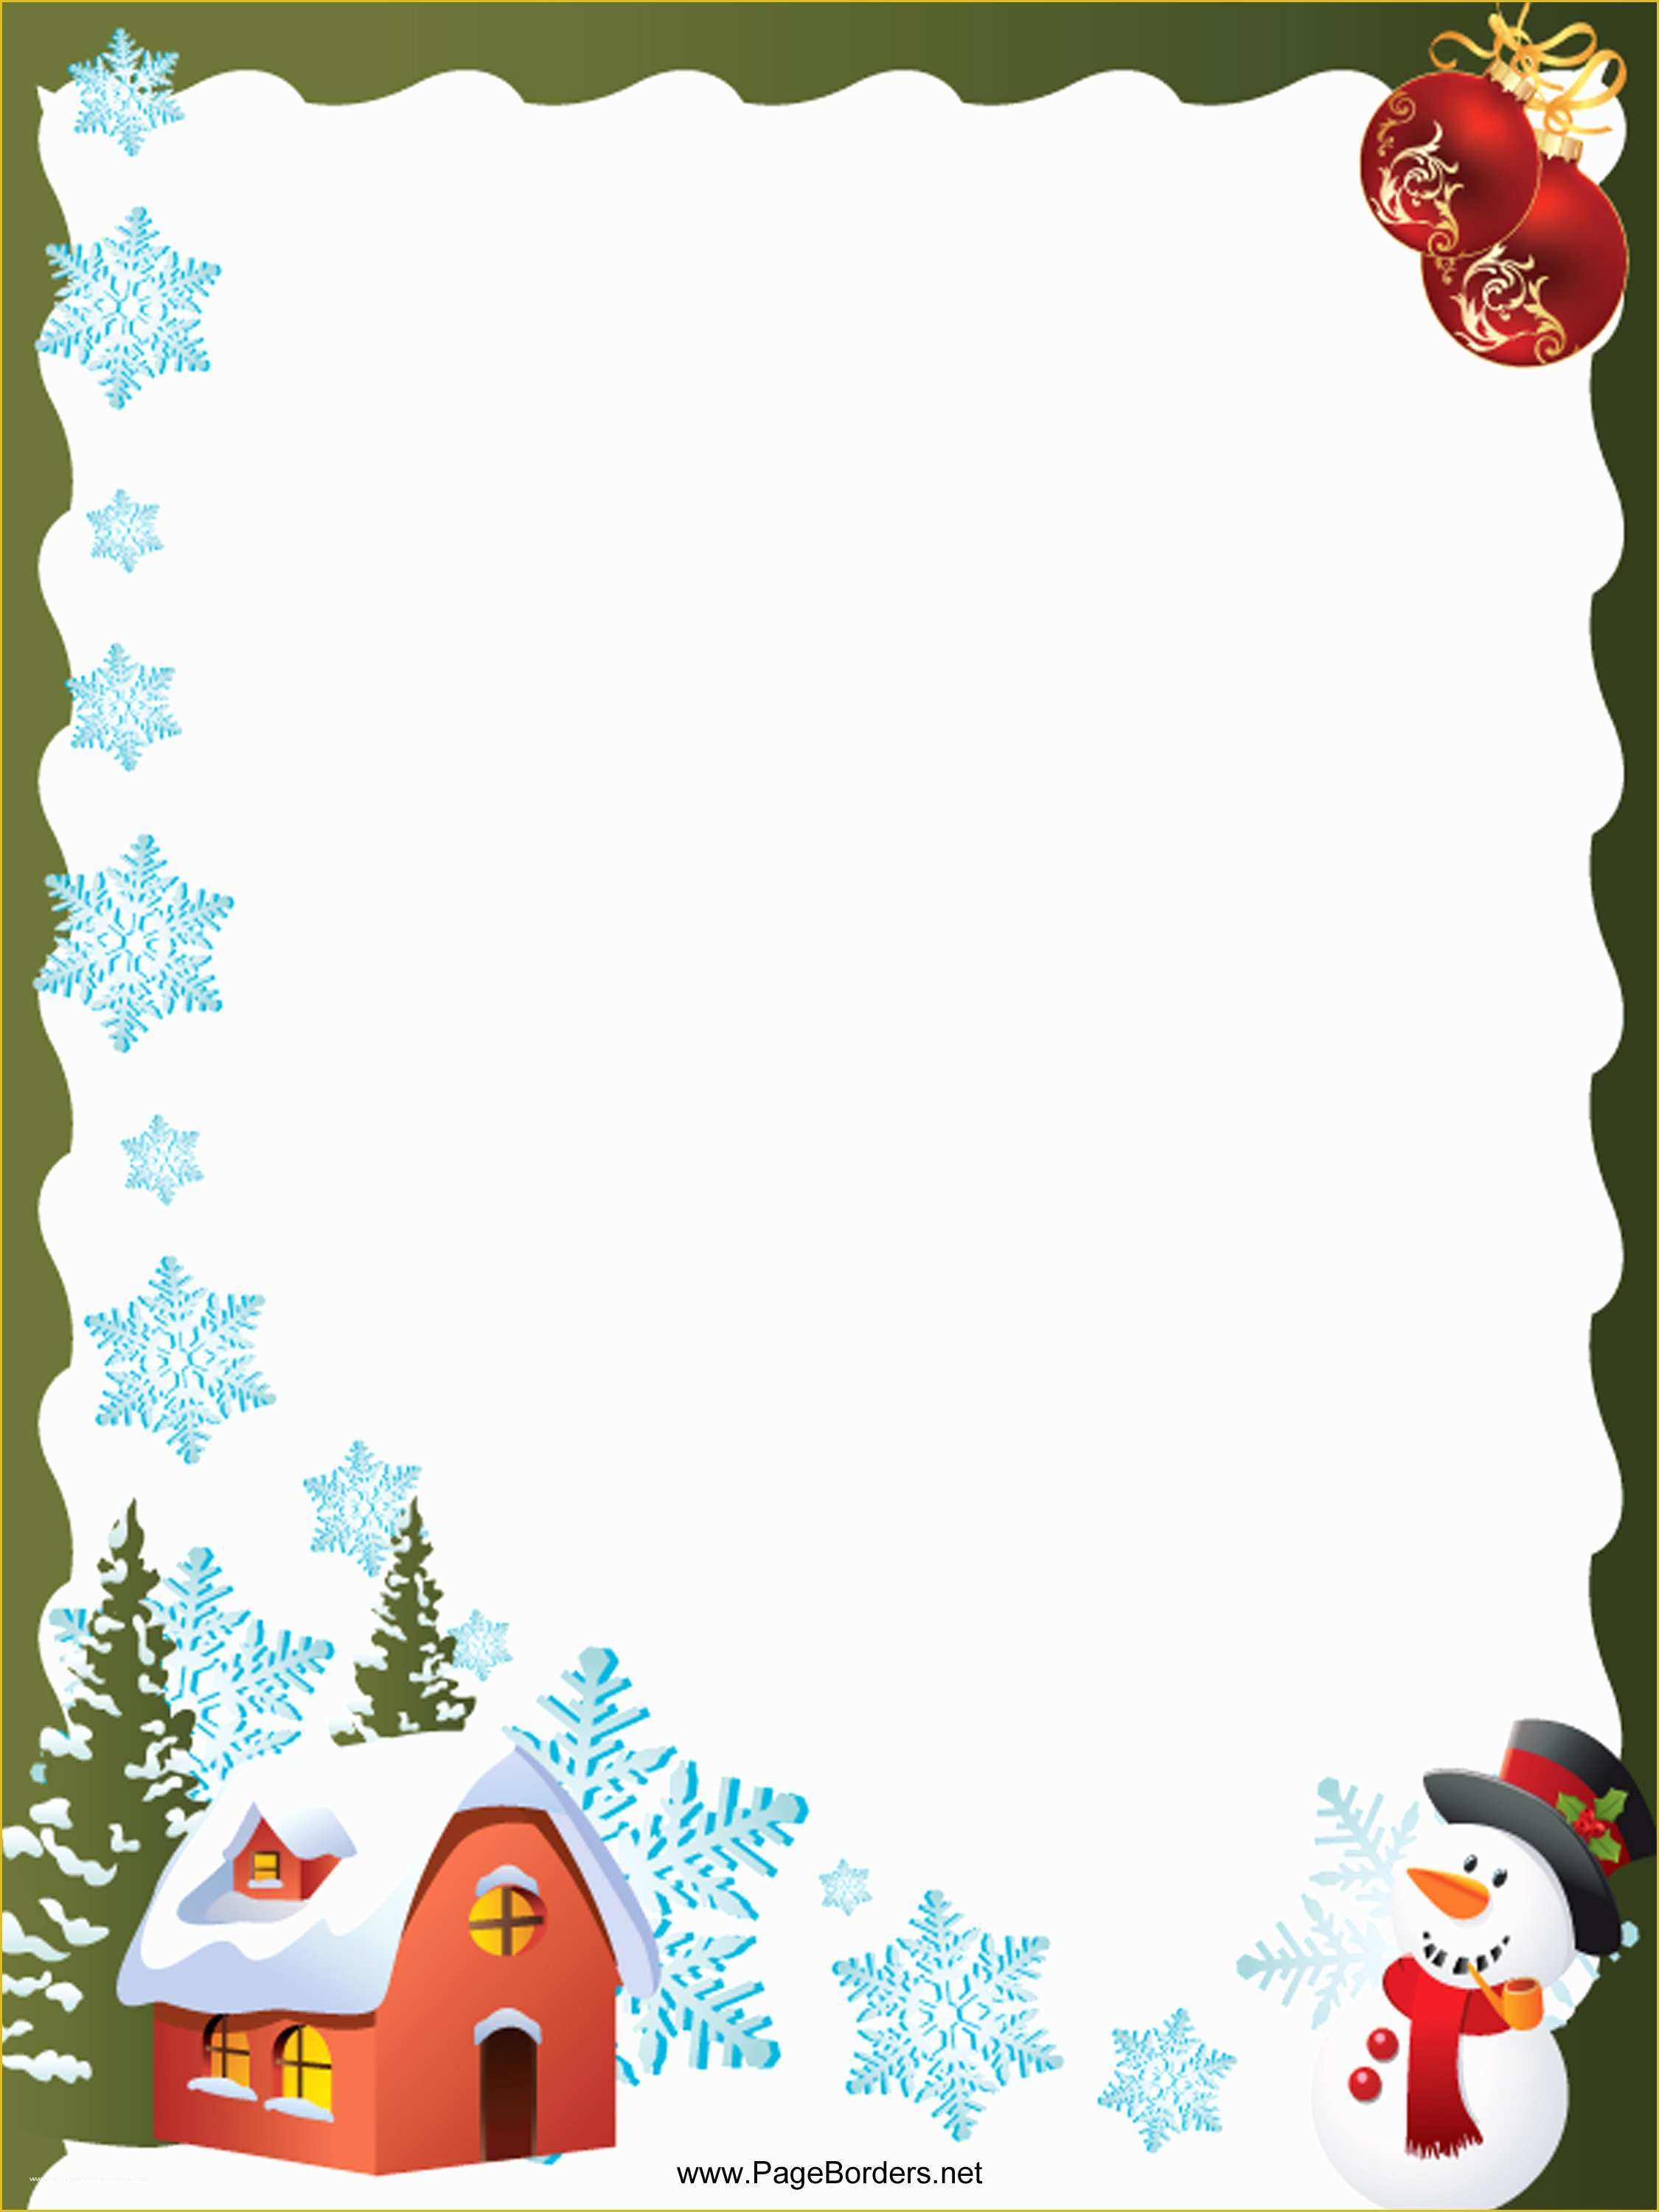 Christmas Letter Border Templates Free Of Border for Christmas Letter – Festival Collections